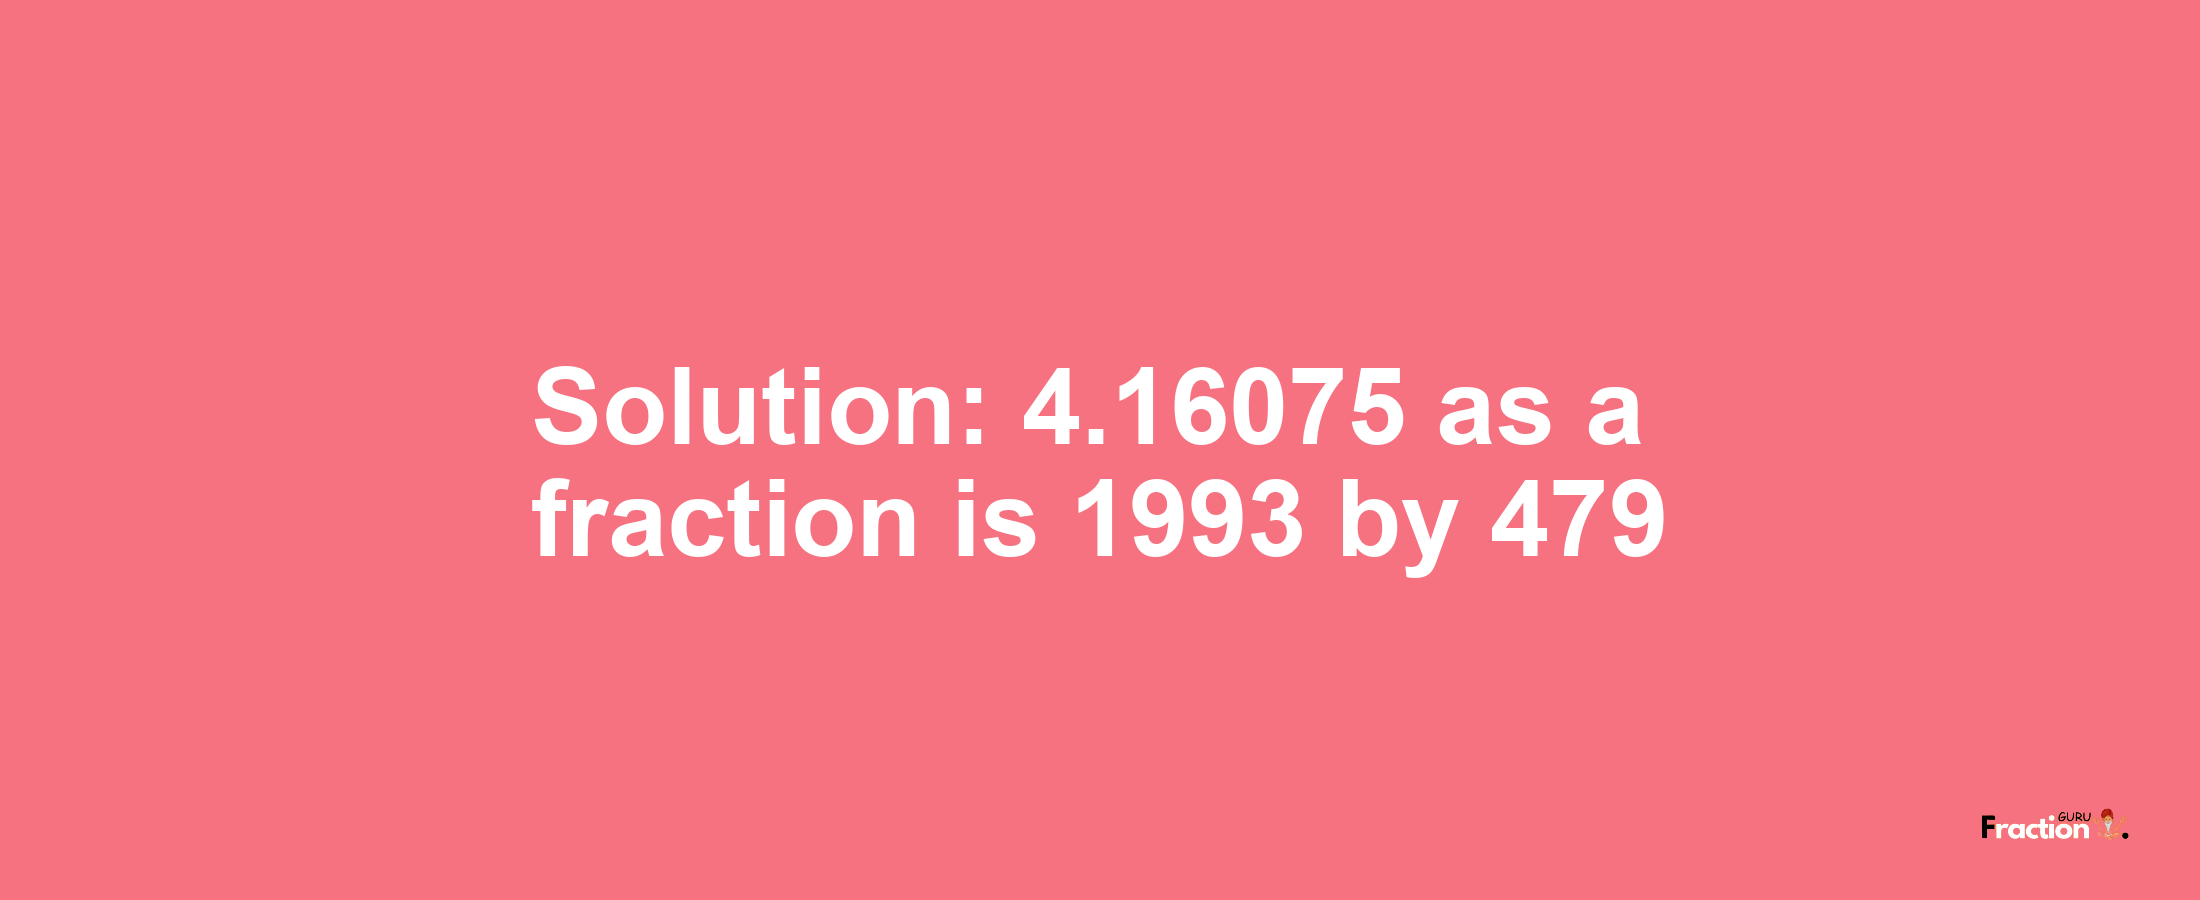 Solution:4.16075 as a fraction is 1993/479